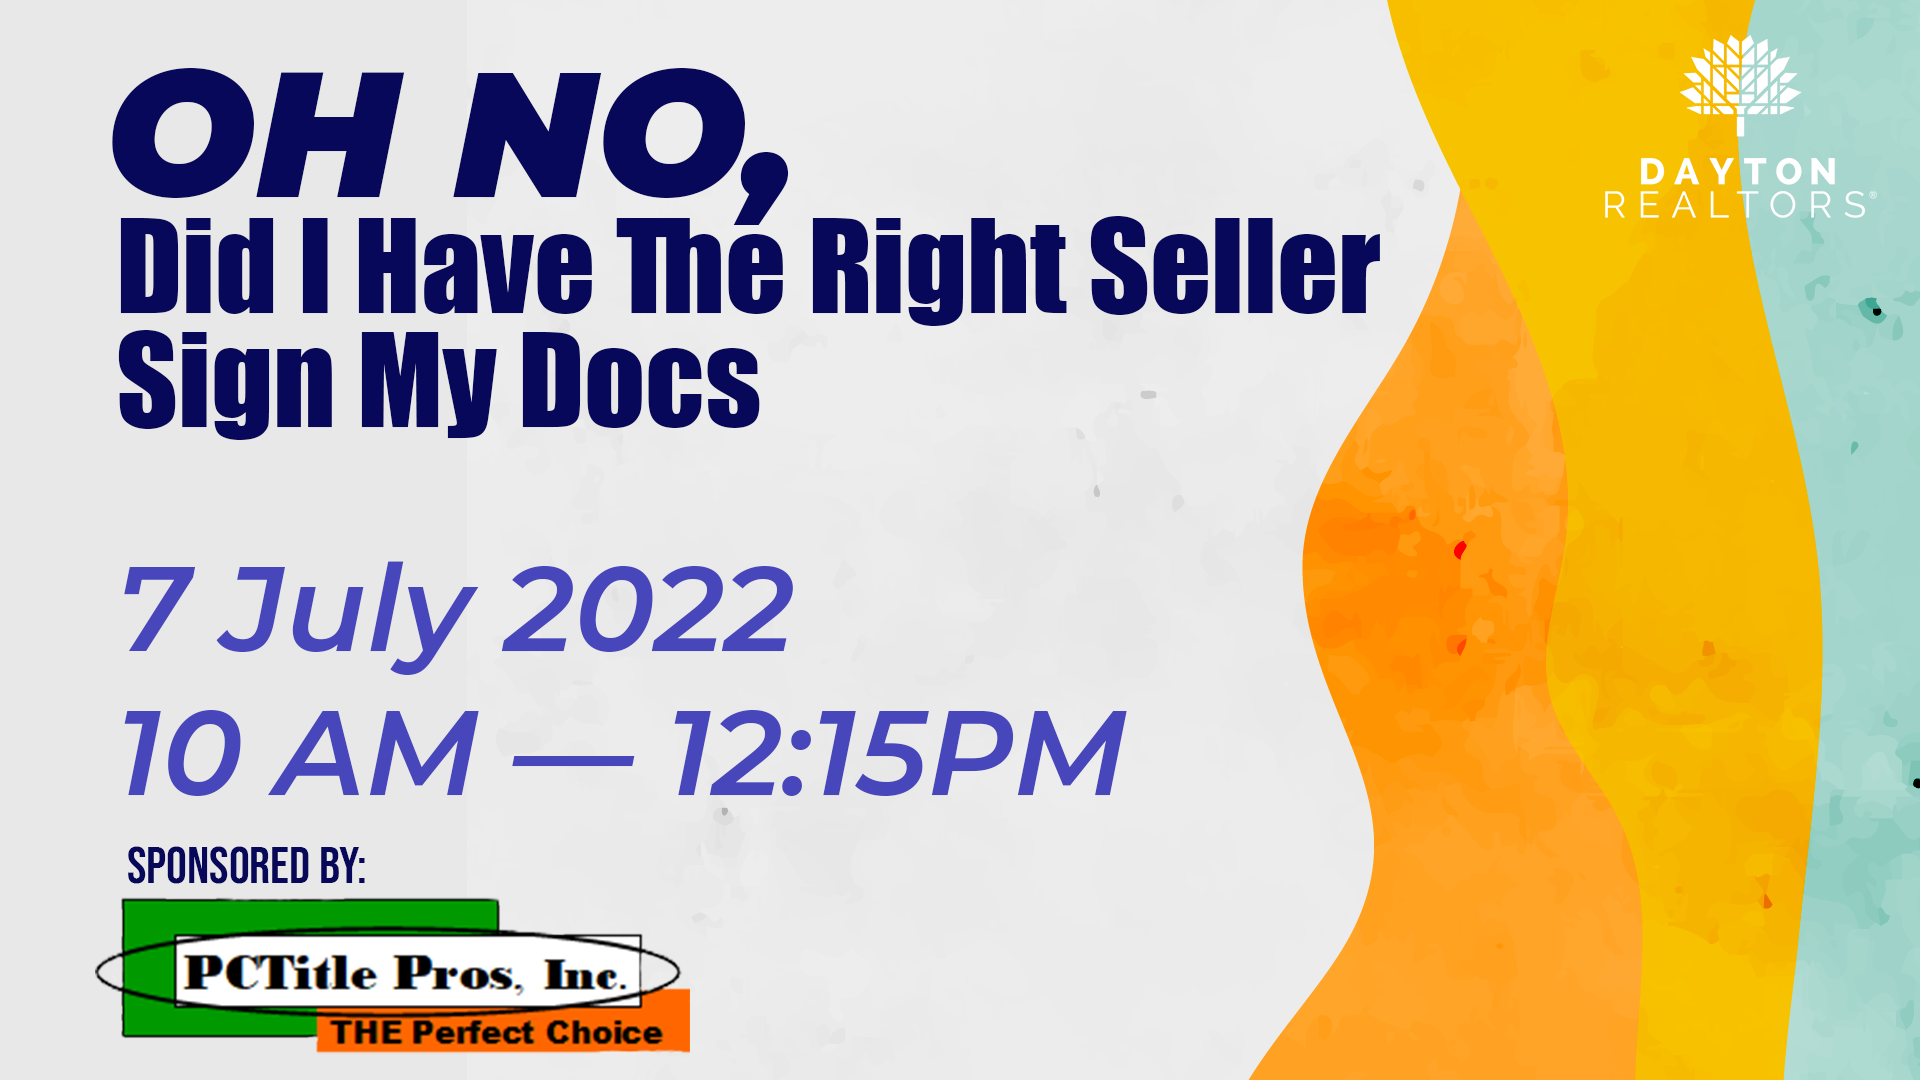 Oh No, did the Seller Sign the Right Docs, July 7